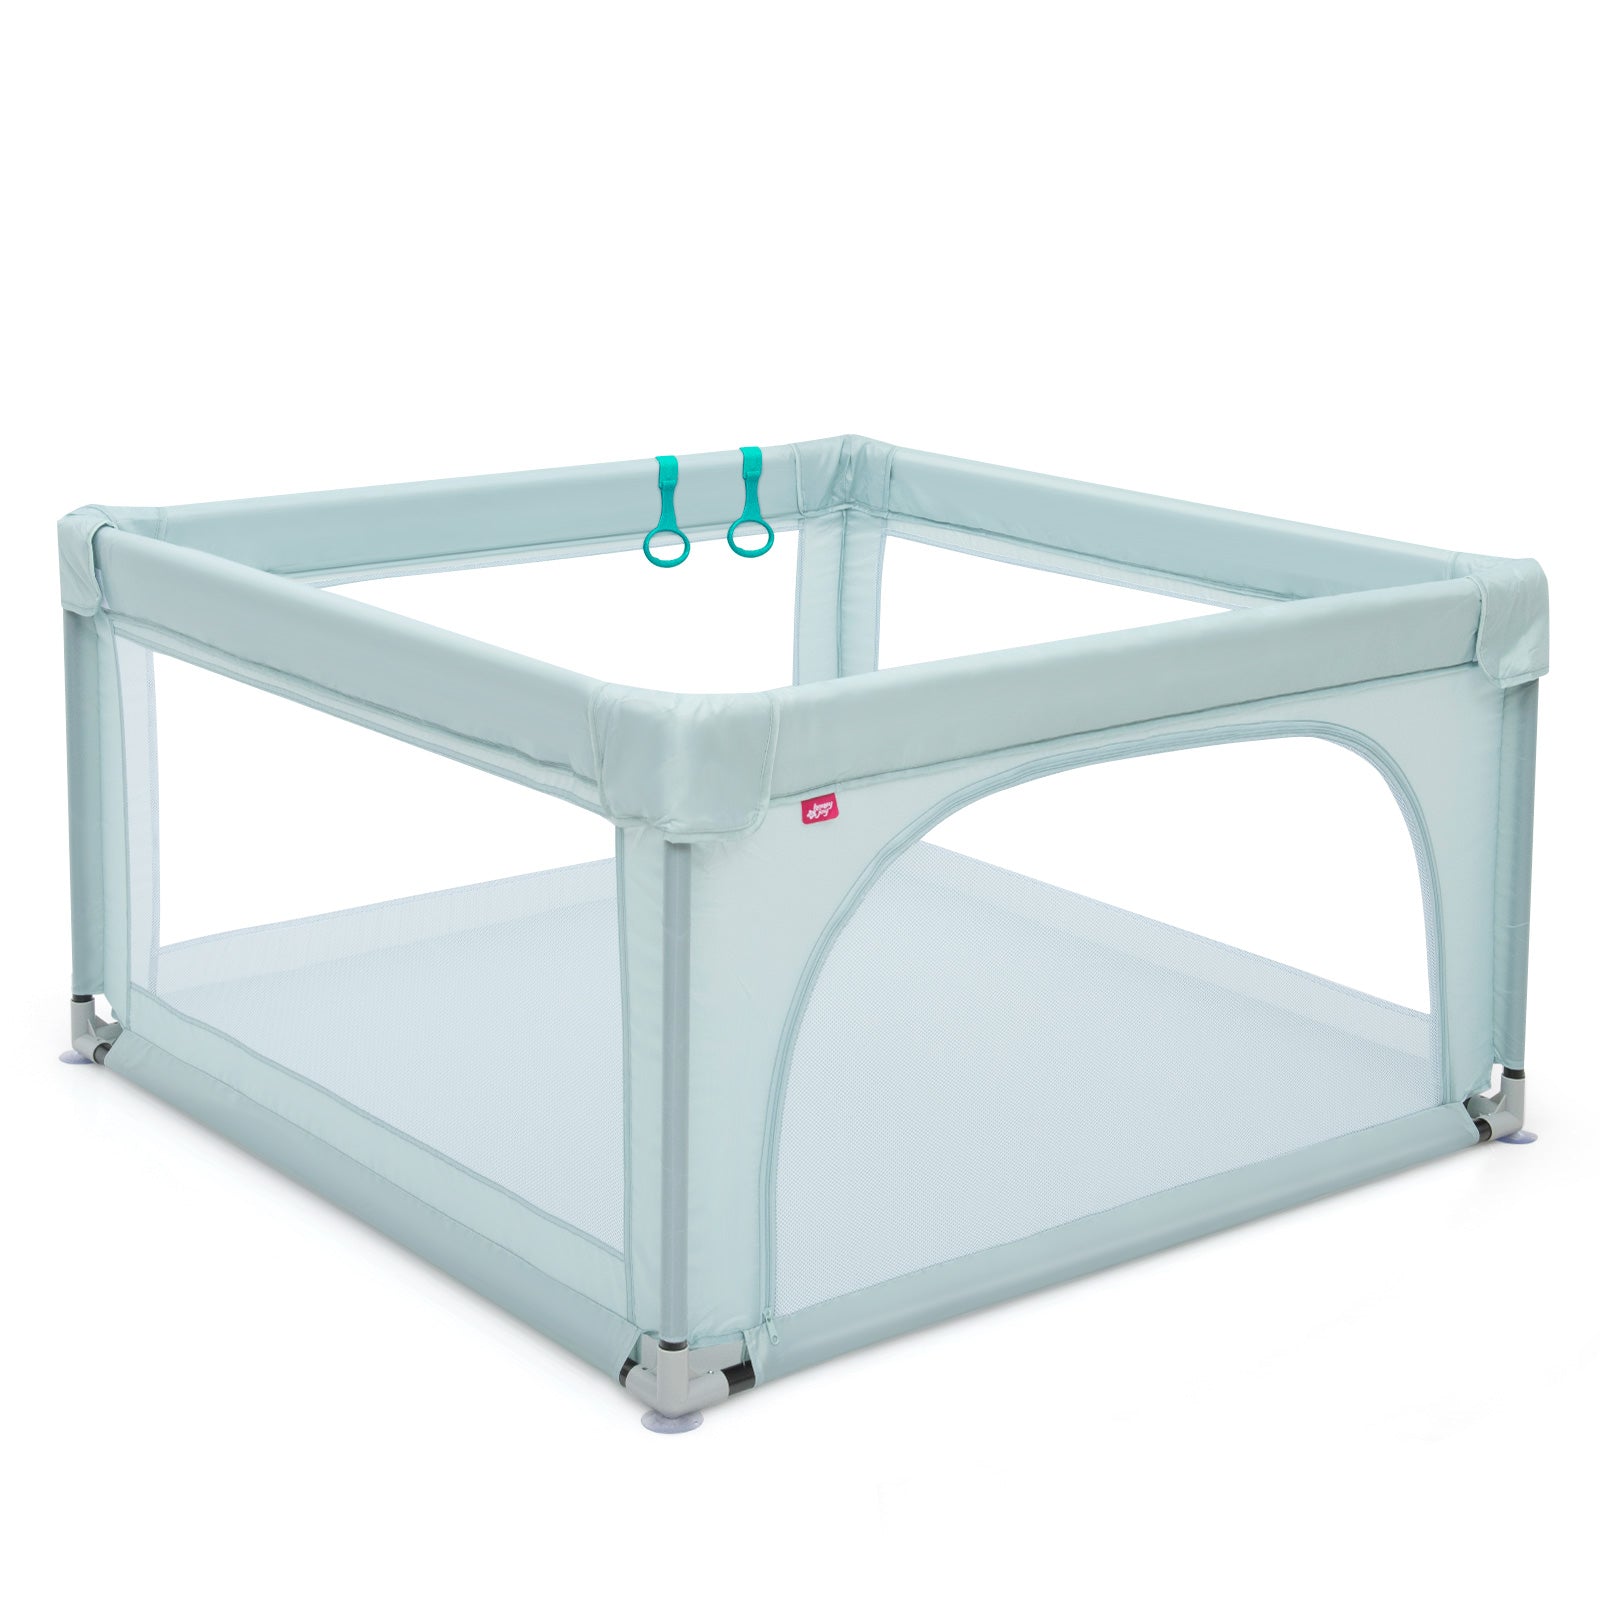 Safe and Playful: Baby Playpen in Vibrant Blue